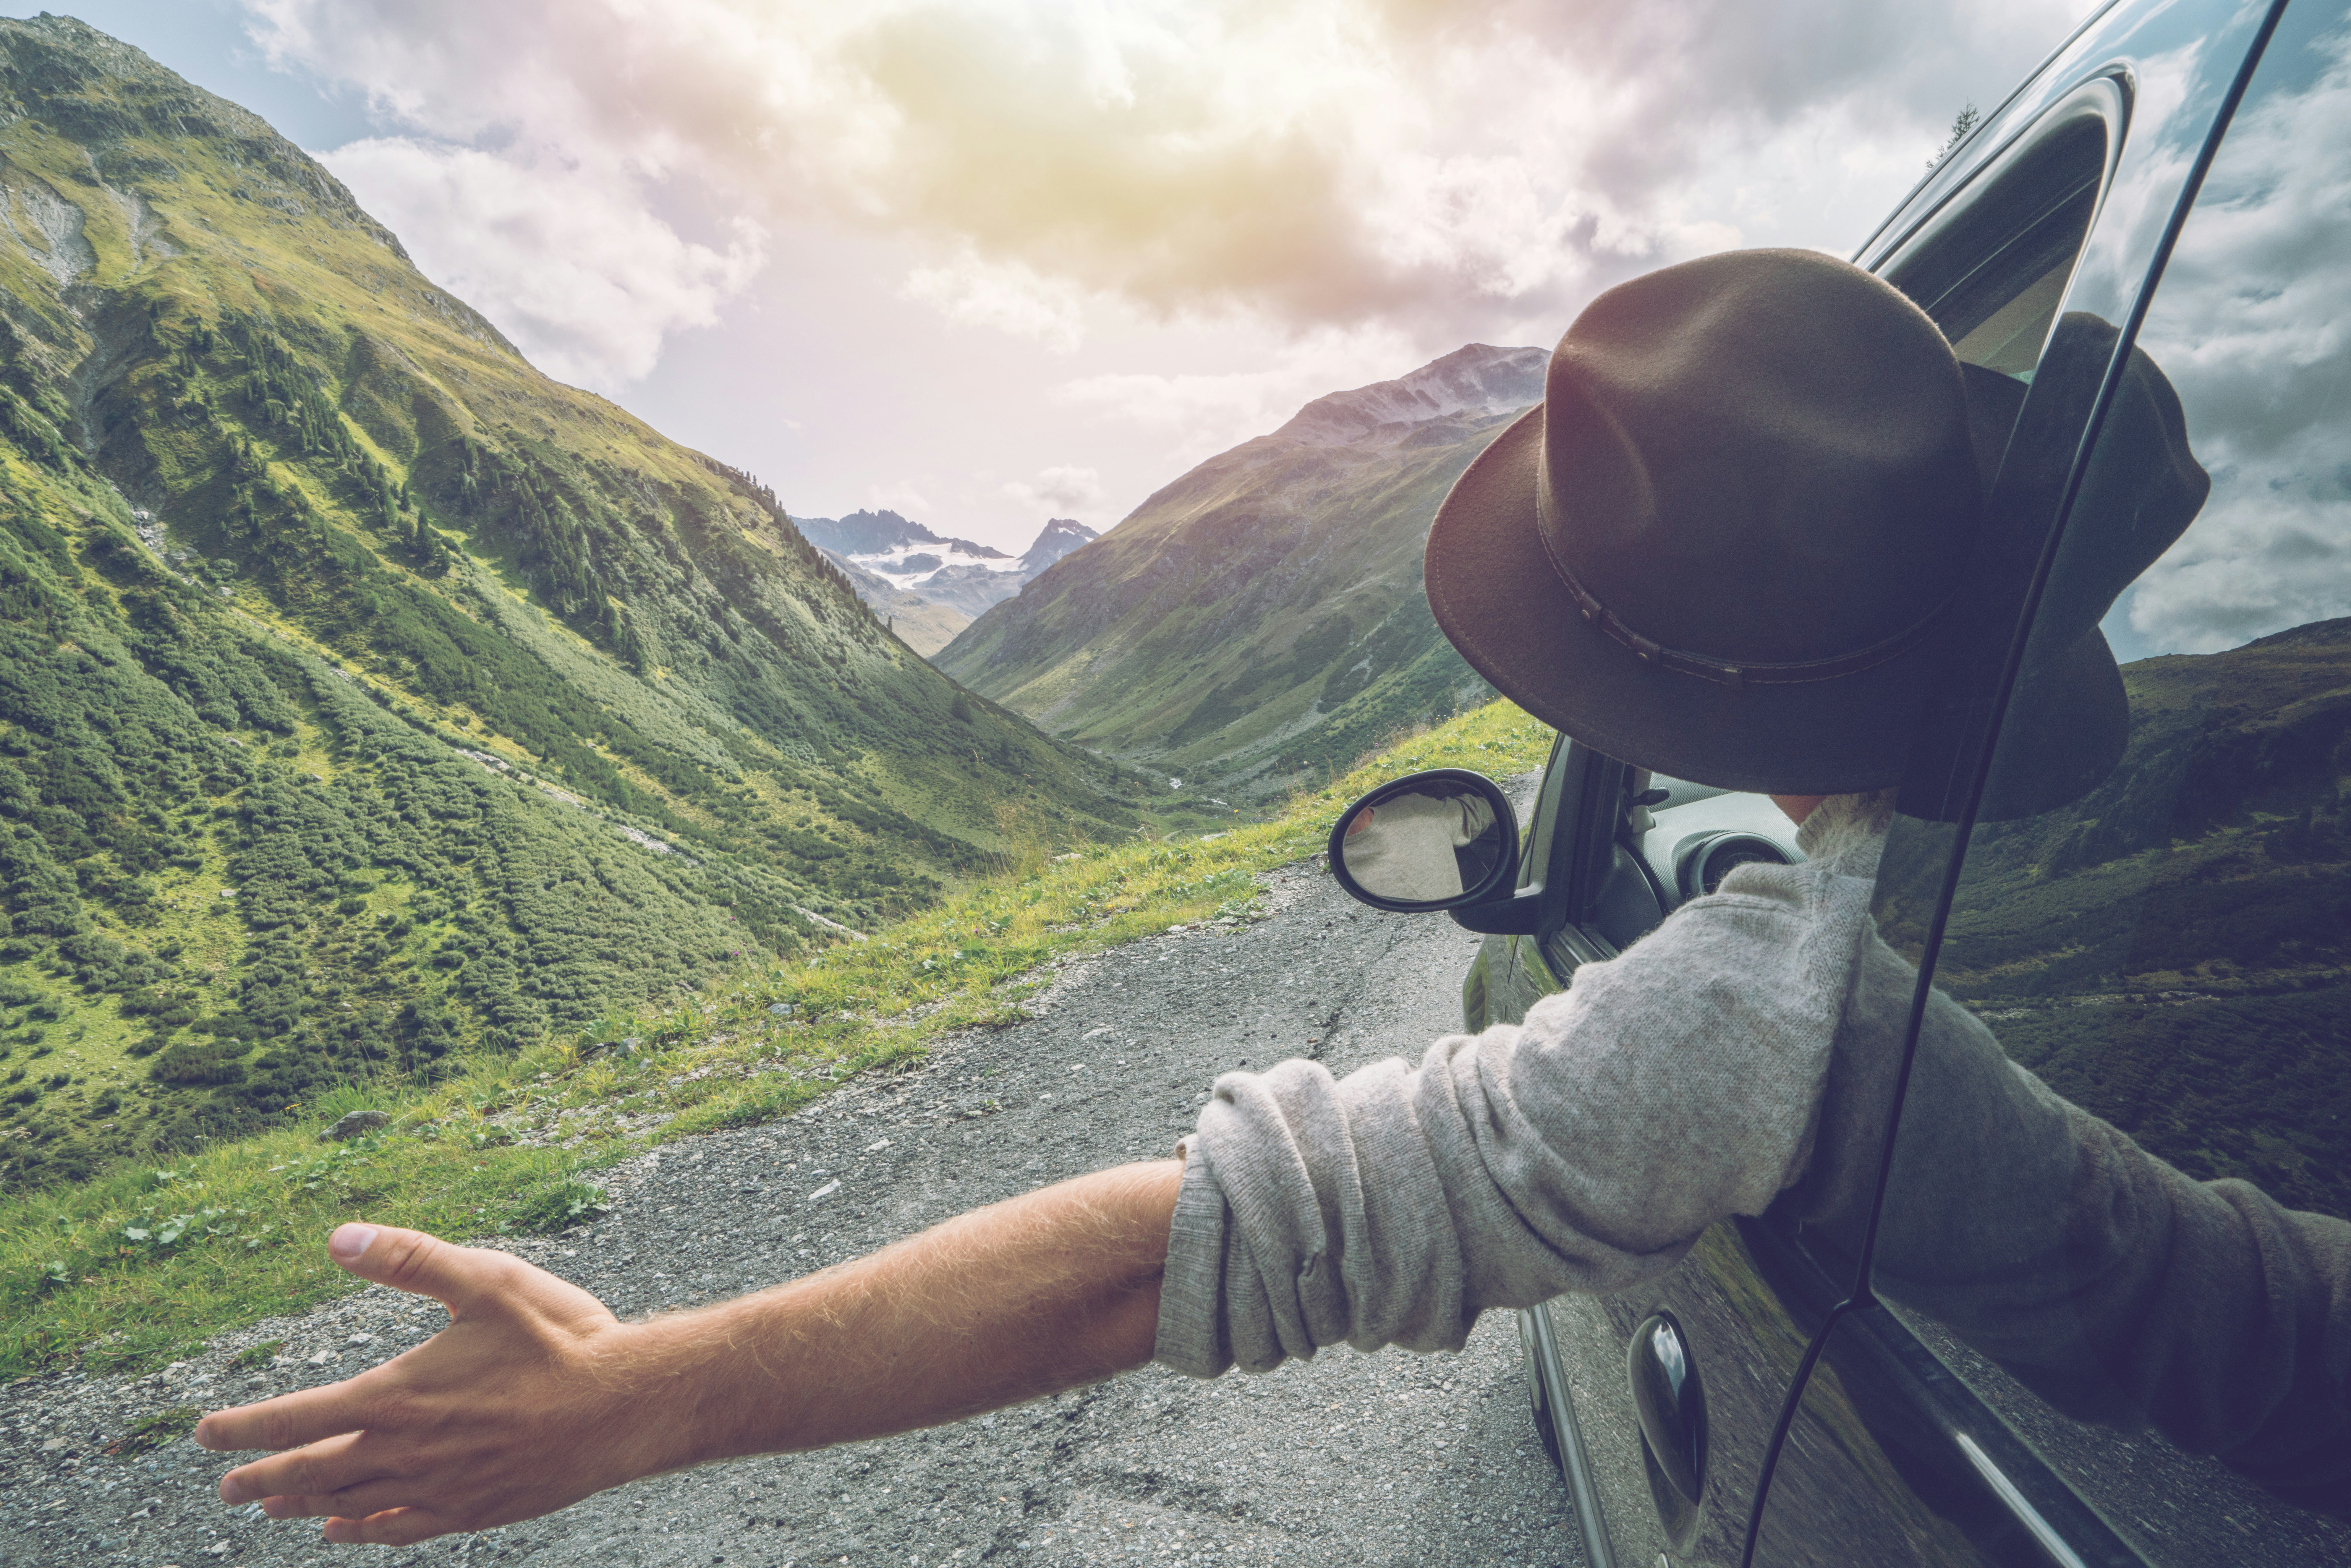 Young man in car on mountain road looks out from window car, outstretched arms for freedom. Mountain landscape in Summer, shot in Graubunden Canton, Switzerland.